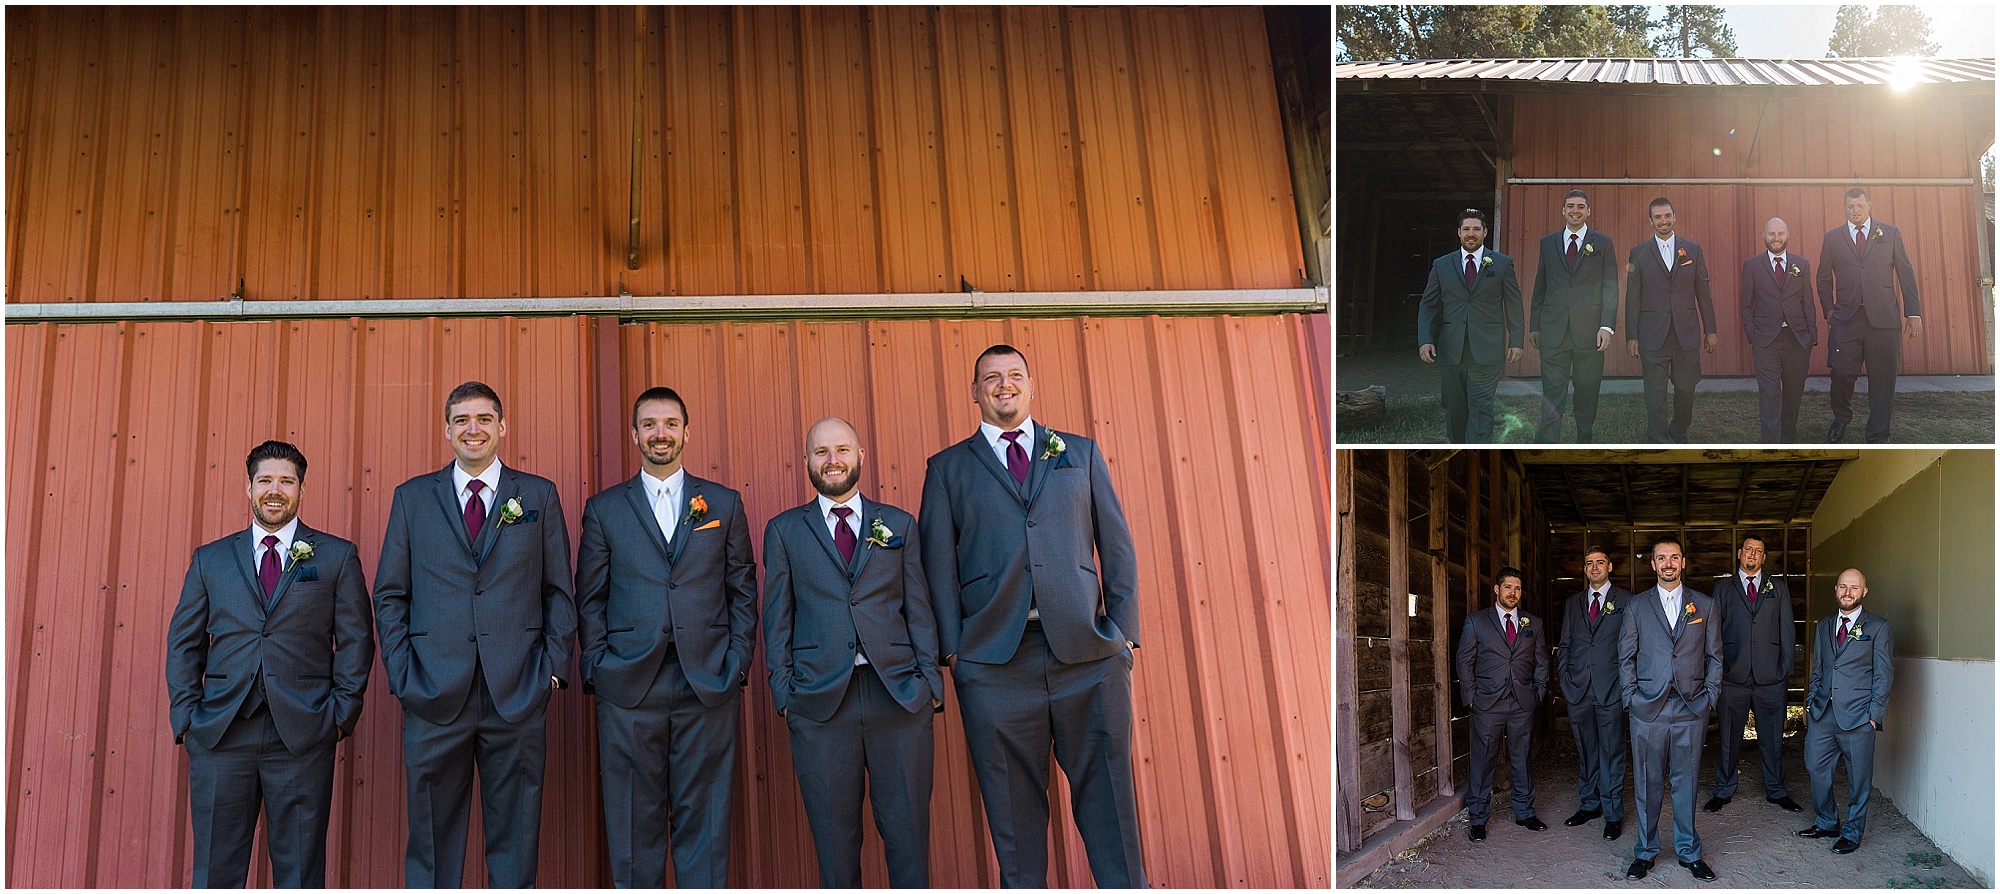 The red metal shed is a fun spot for wedding party portraits at Hollinshead Barn in Bend, OR. | Erica Swantek Photography